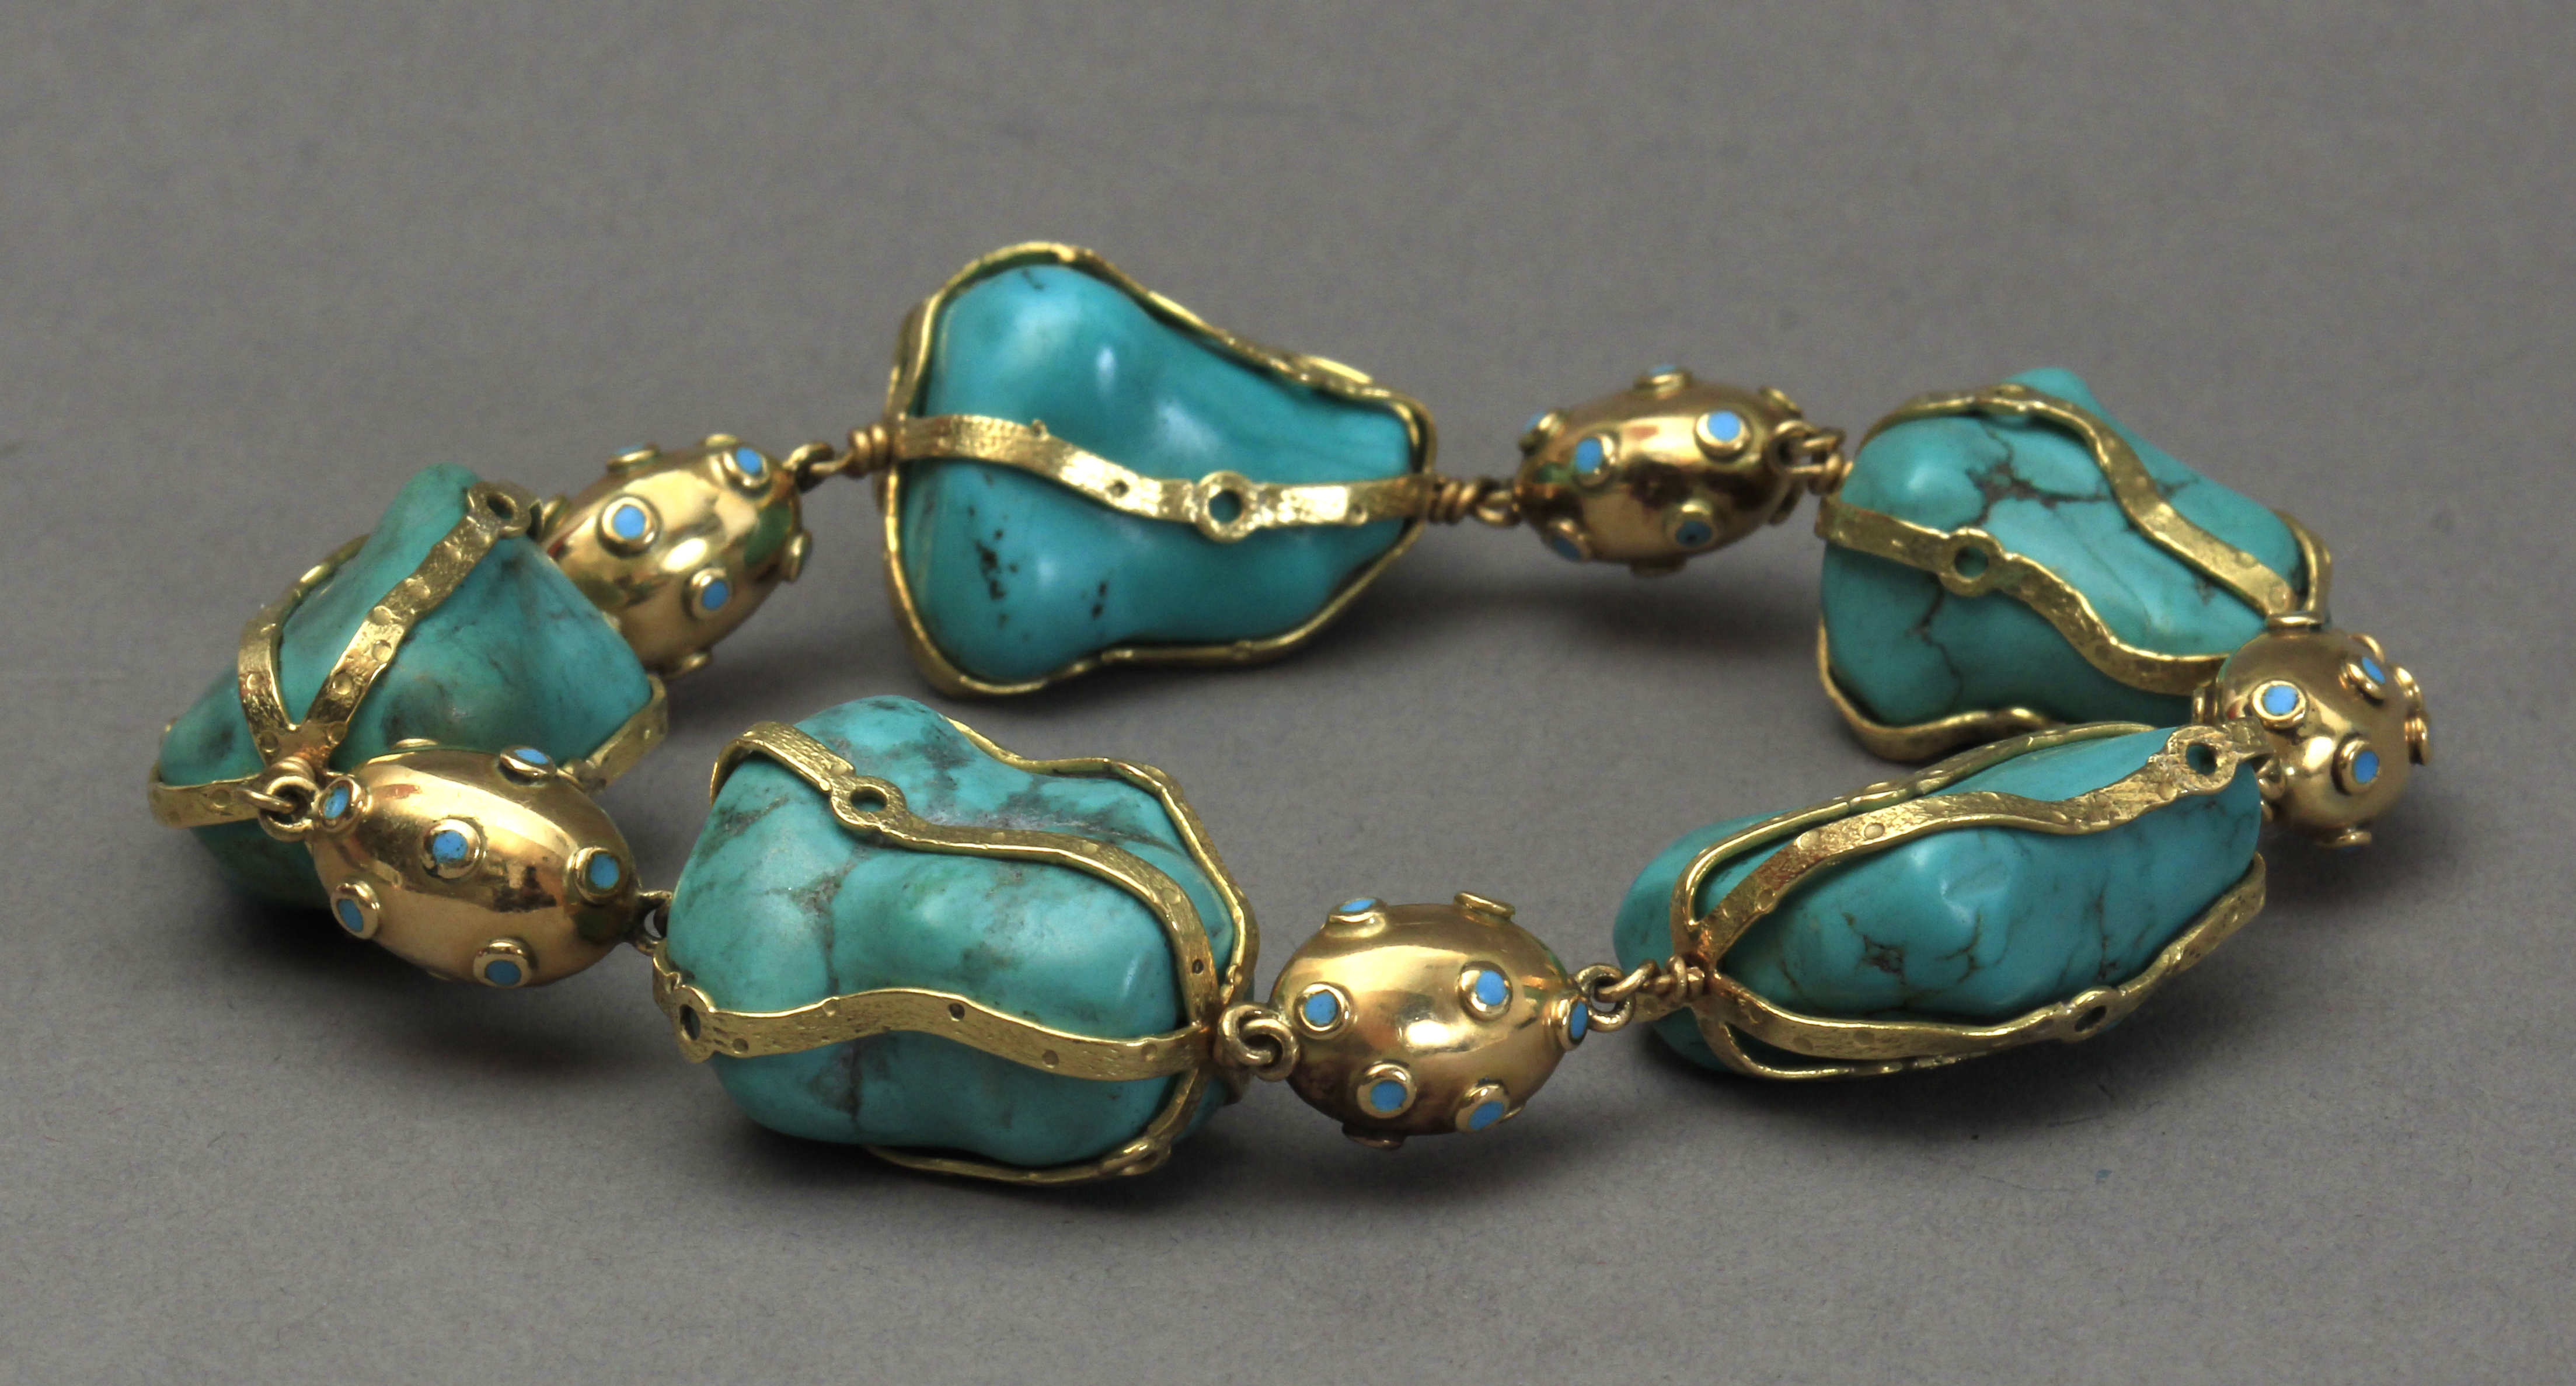 A rough turquoise beads and 18k. yellow gold bracelet - Image 3 of 3